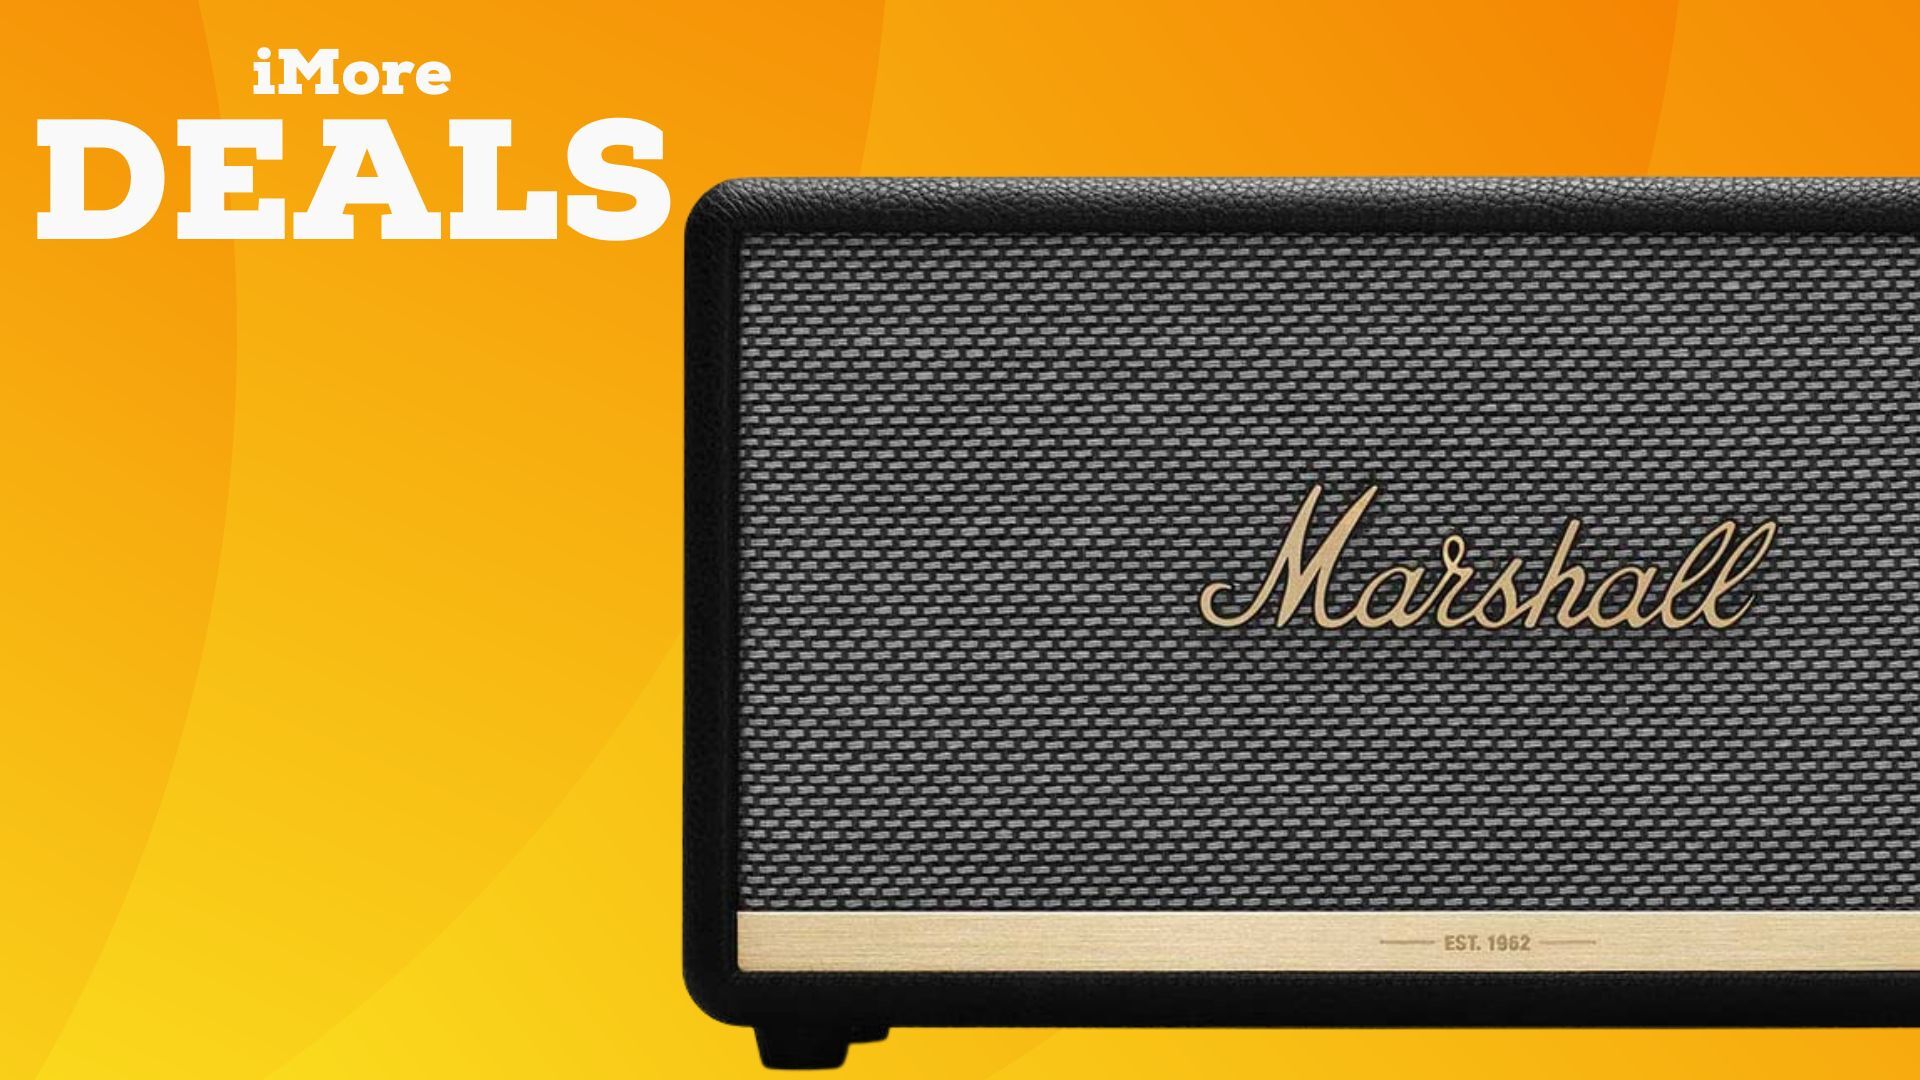 Save $150 on the Marshall Stanmore II Wireless Bluetooth Speaker - IGN